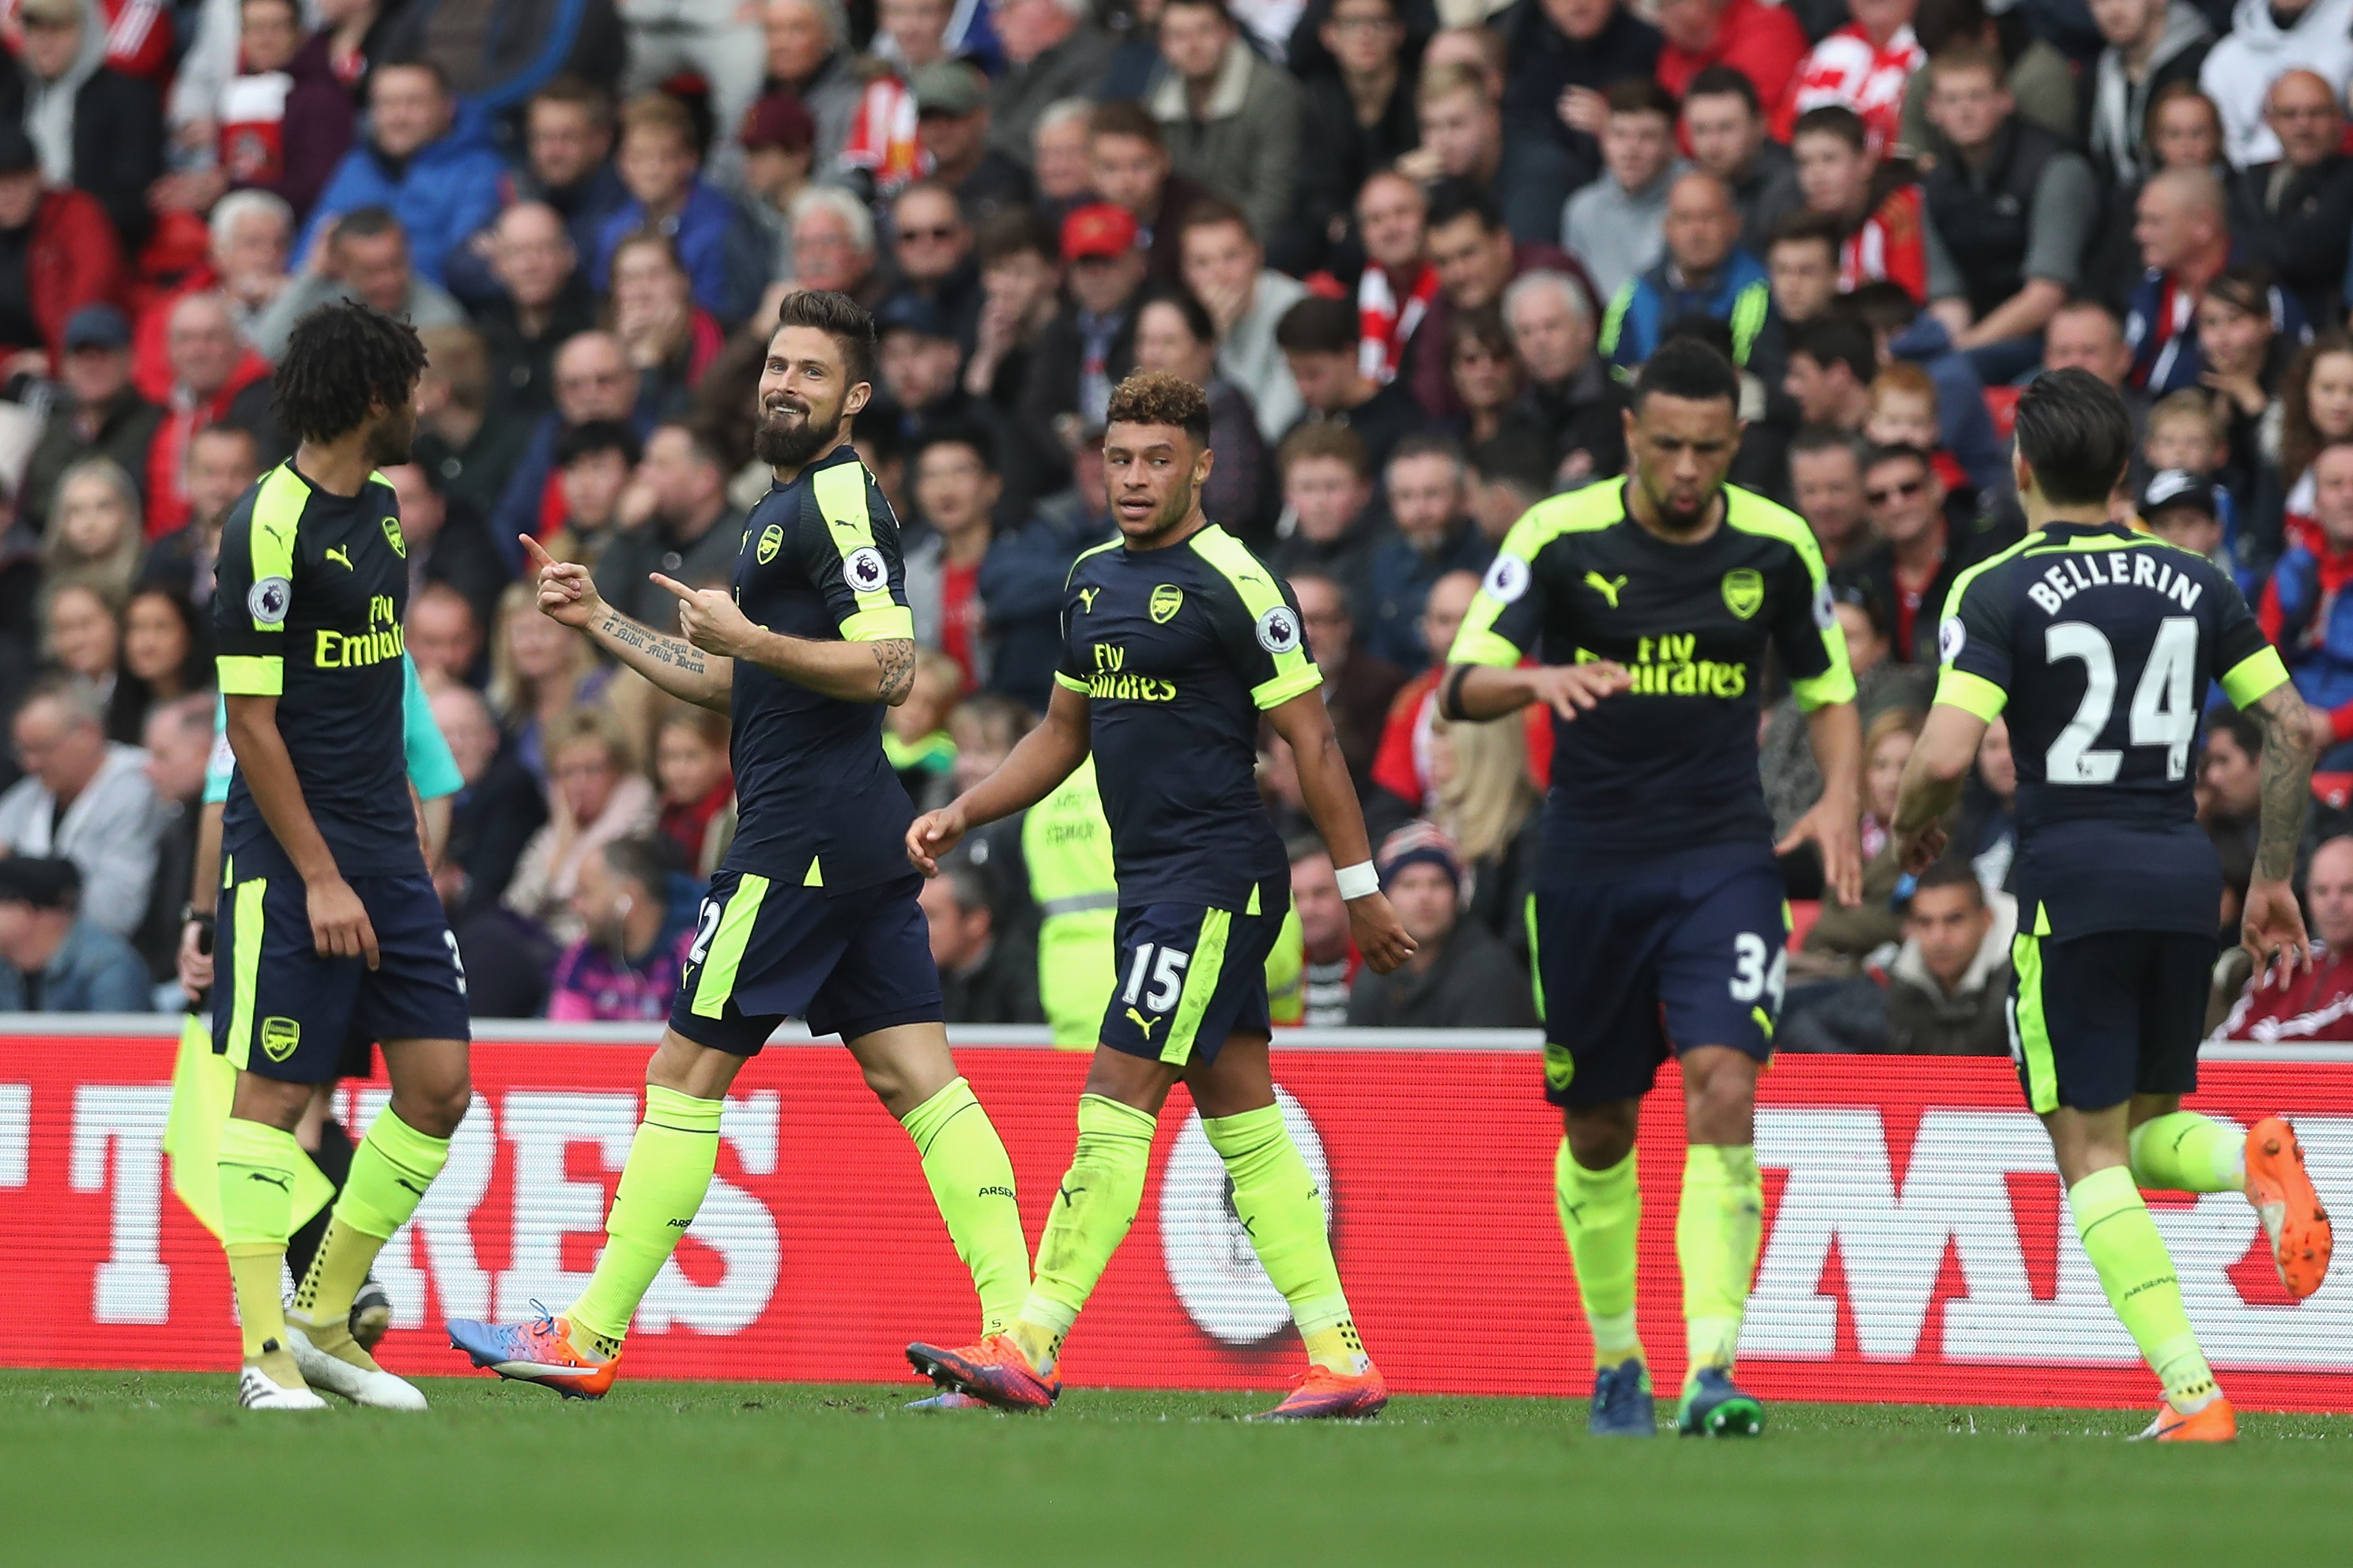 SUNDERLAND, ENGLAND - OCTOBER 29:  Olivier Giroud of Arsenal (C) celebrates scoring his sides second goal with his Arsenal team mates during the Premier League match between Sunderland and Arsenal at the Stadium of Light on October 29, 2016 in Sunderland, England.  (Photo by Ian MacNicol/Getty Images)